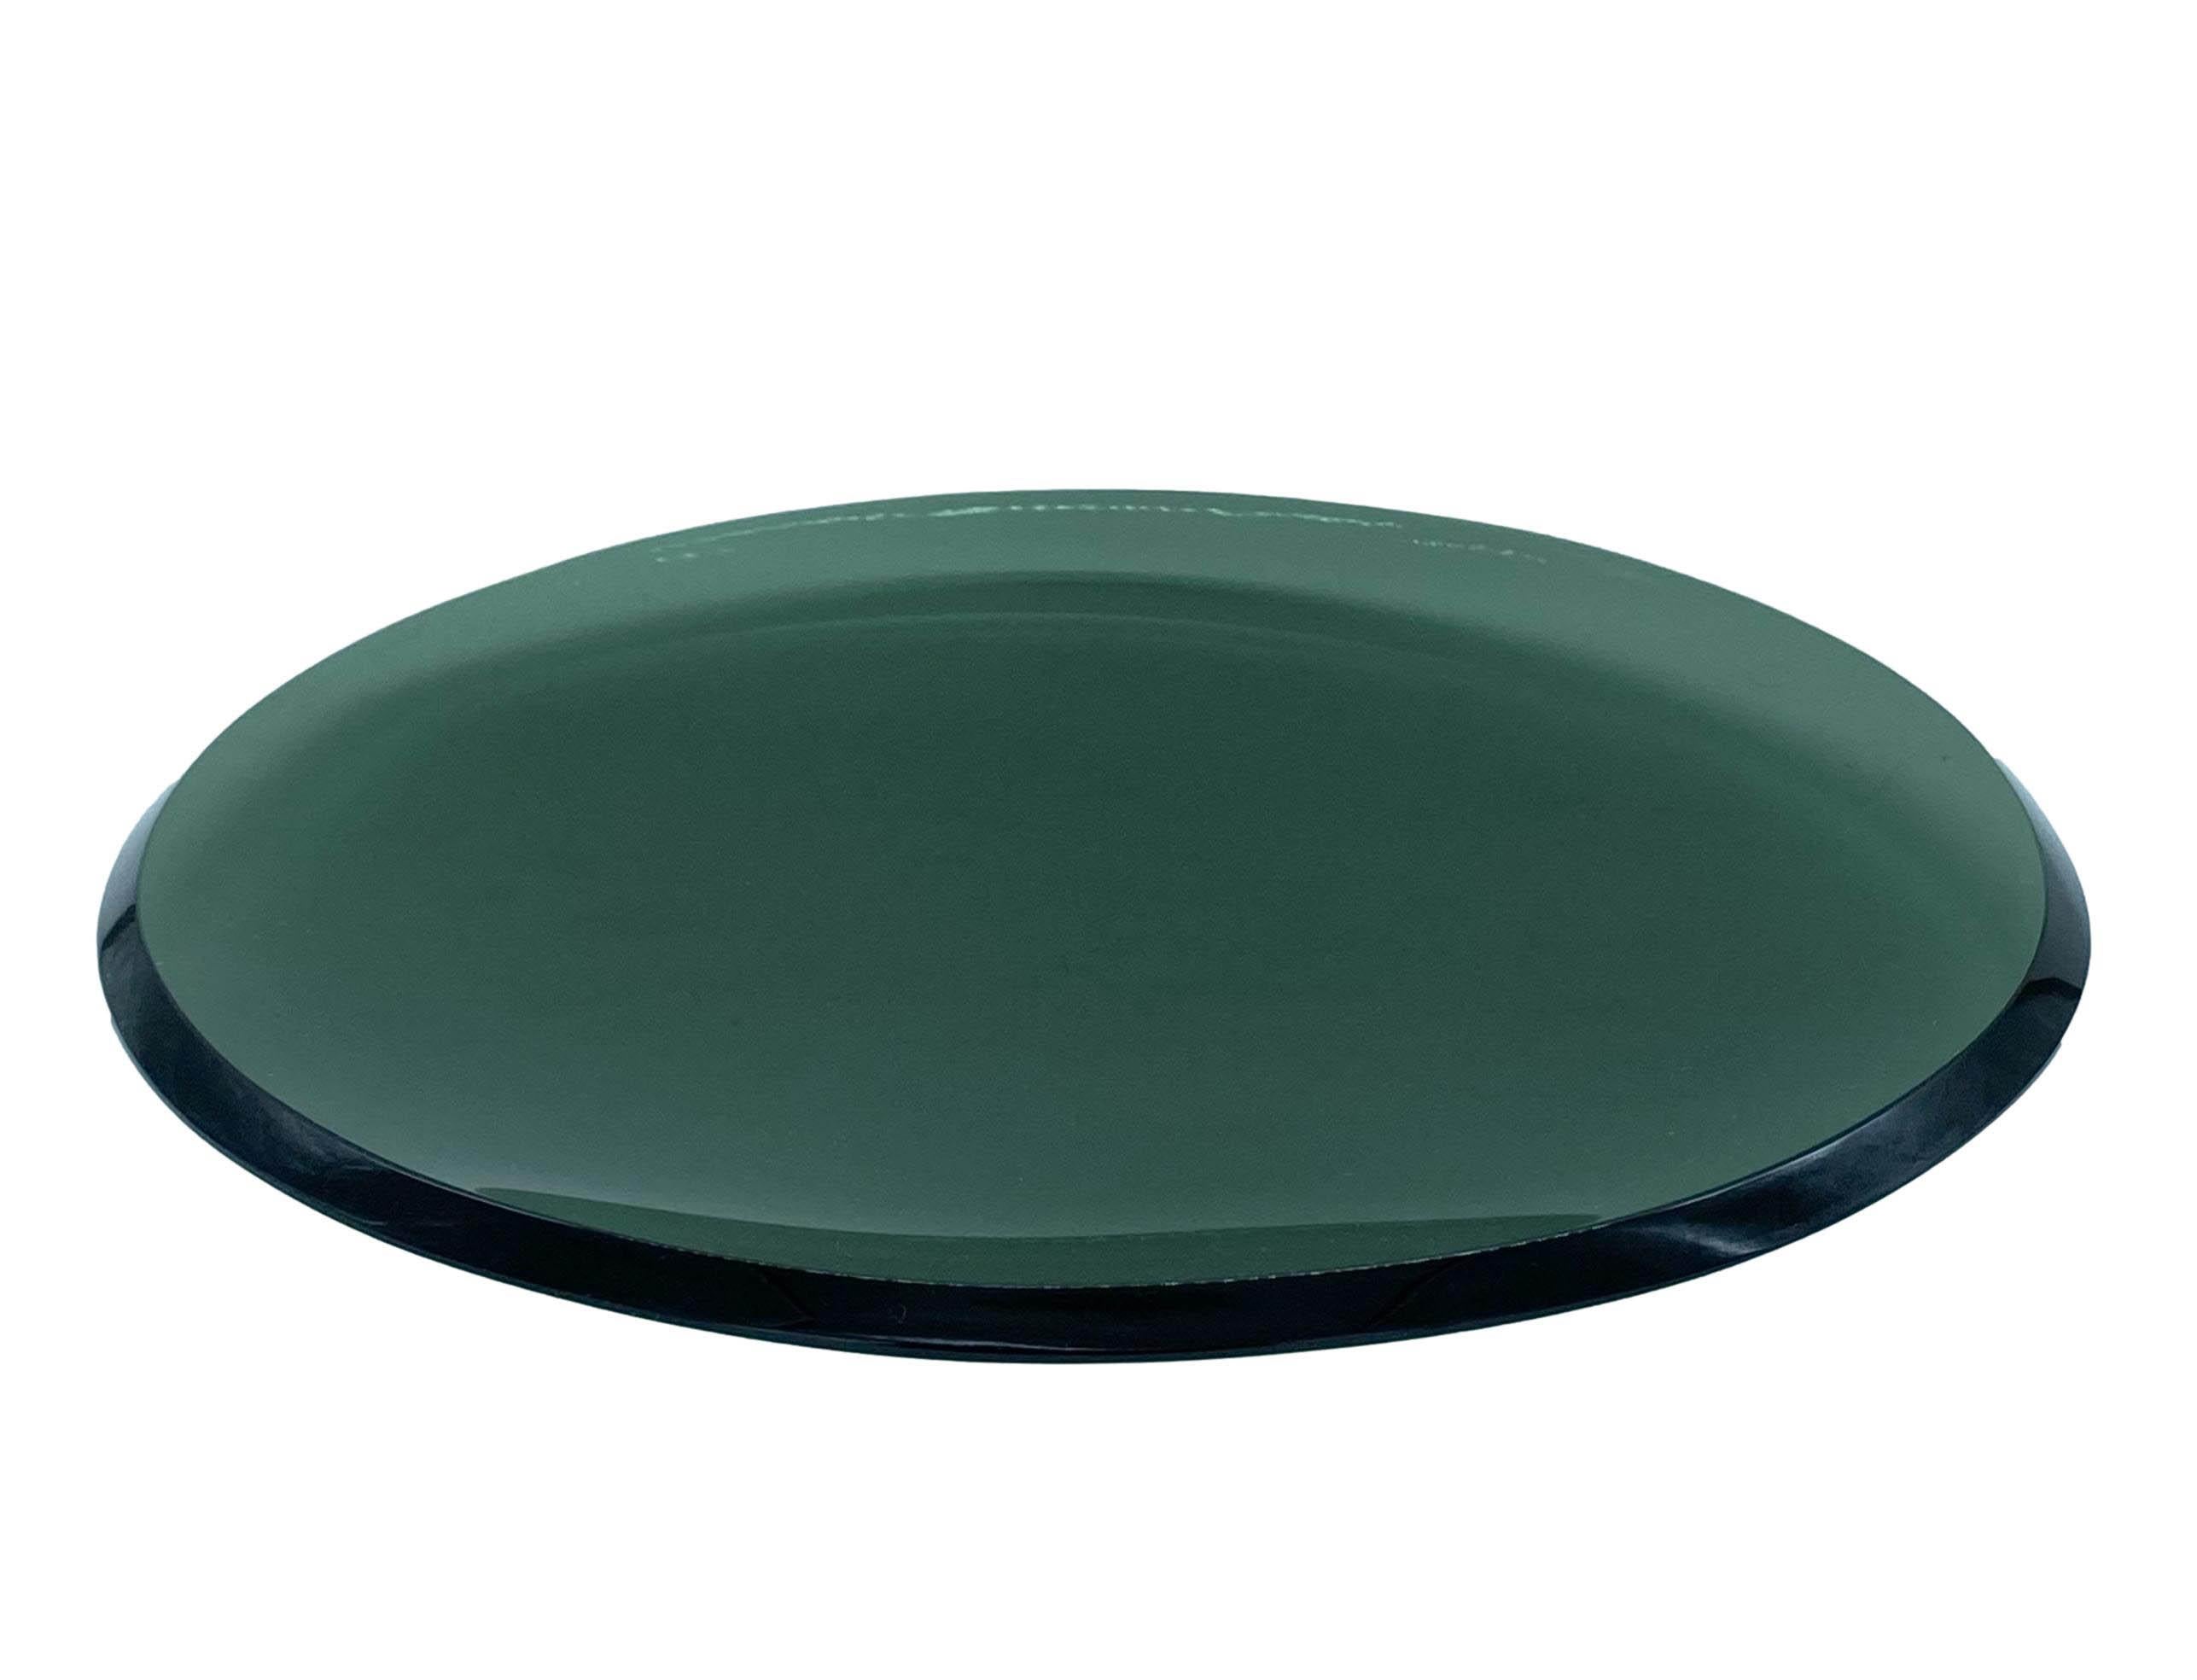 This rare and delightful glass centrepiece has a round shape with slightly rounded edges and a sunken centre, and consists of three overlapping plates of three different sizes. The subtle green glass colour, delicate curves and bevelled edges